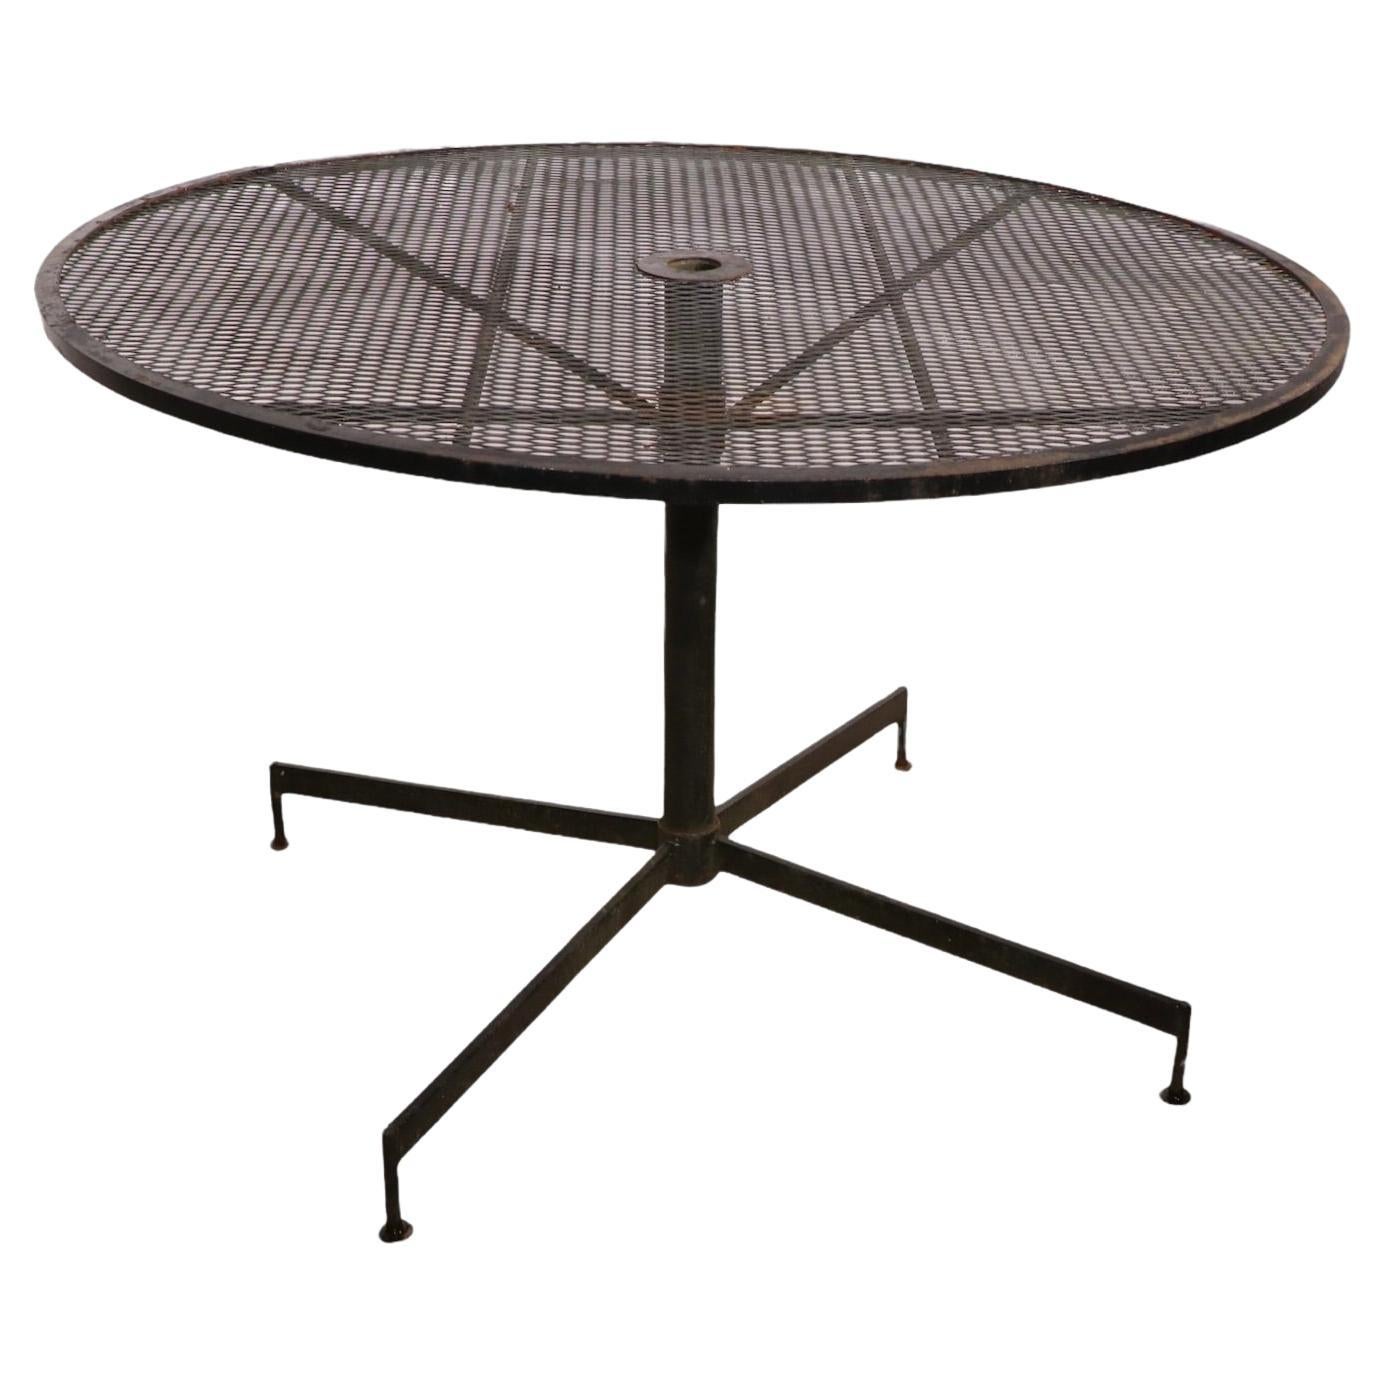 Chic architectural wrought iron and metal mesh garden, patio, poolside cafe dining table. The table features a circular metal mesh top, supported by an iron center pole, on a four leg star base. Construction reminiscent of Woodard or Salterini,